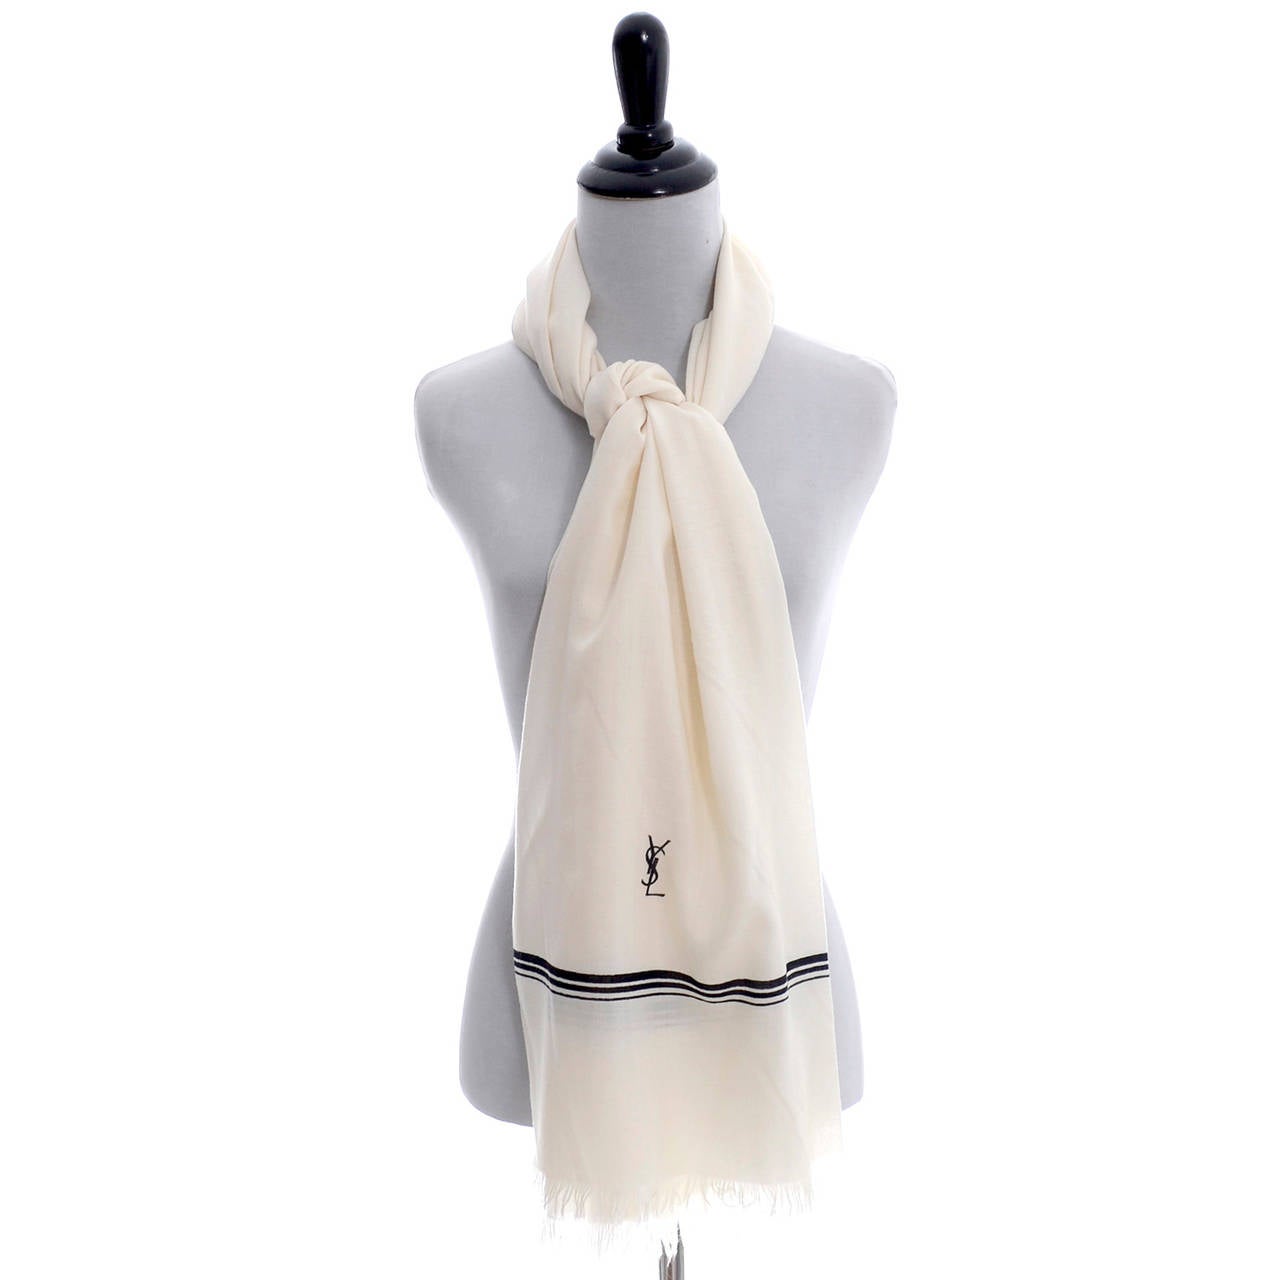 This gorgeous YSL logo scarf measures 36 by 64